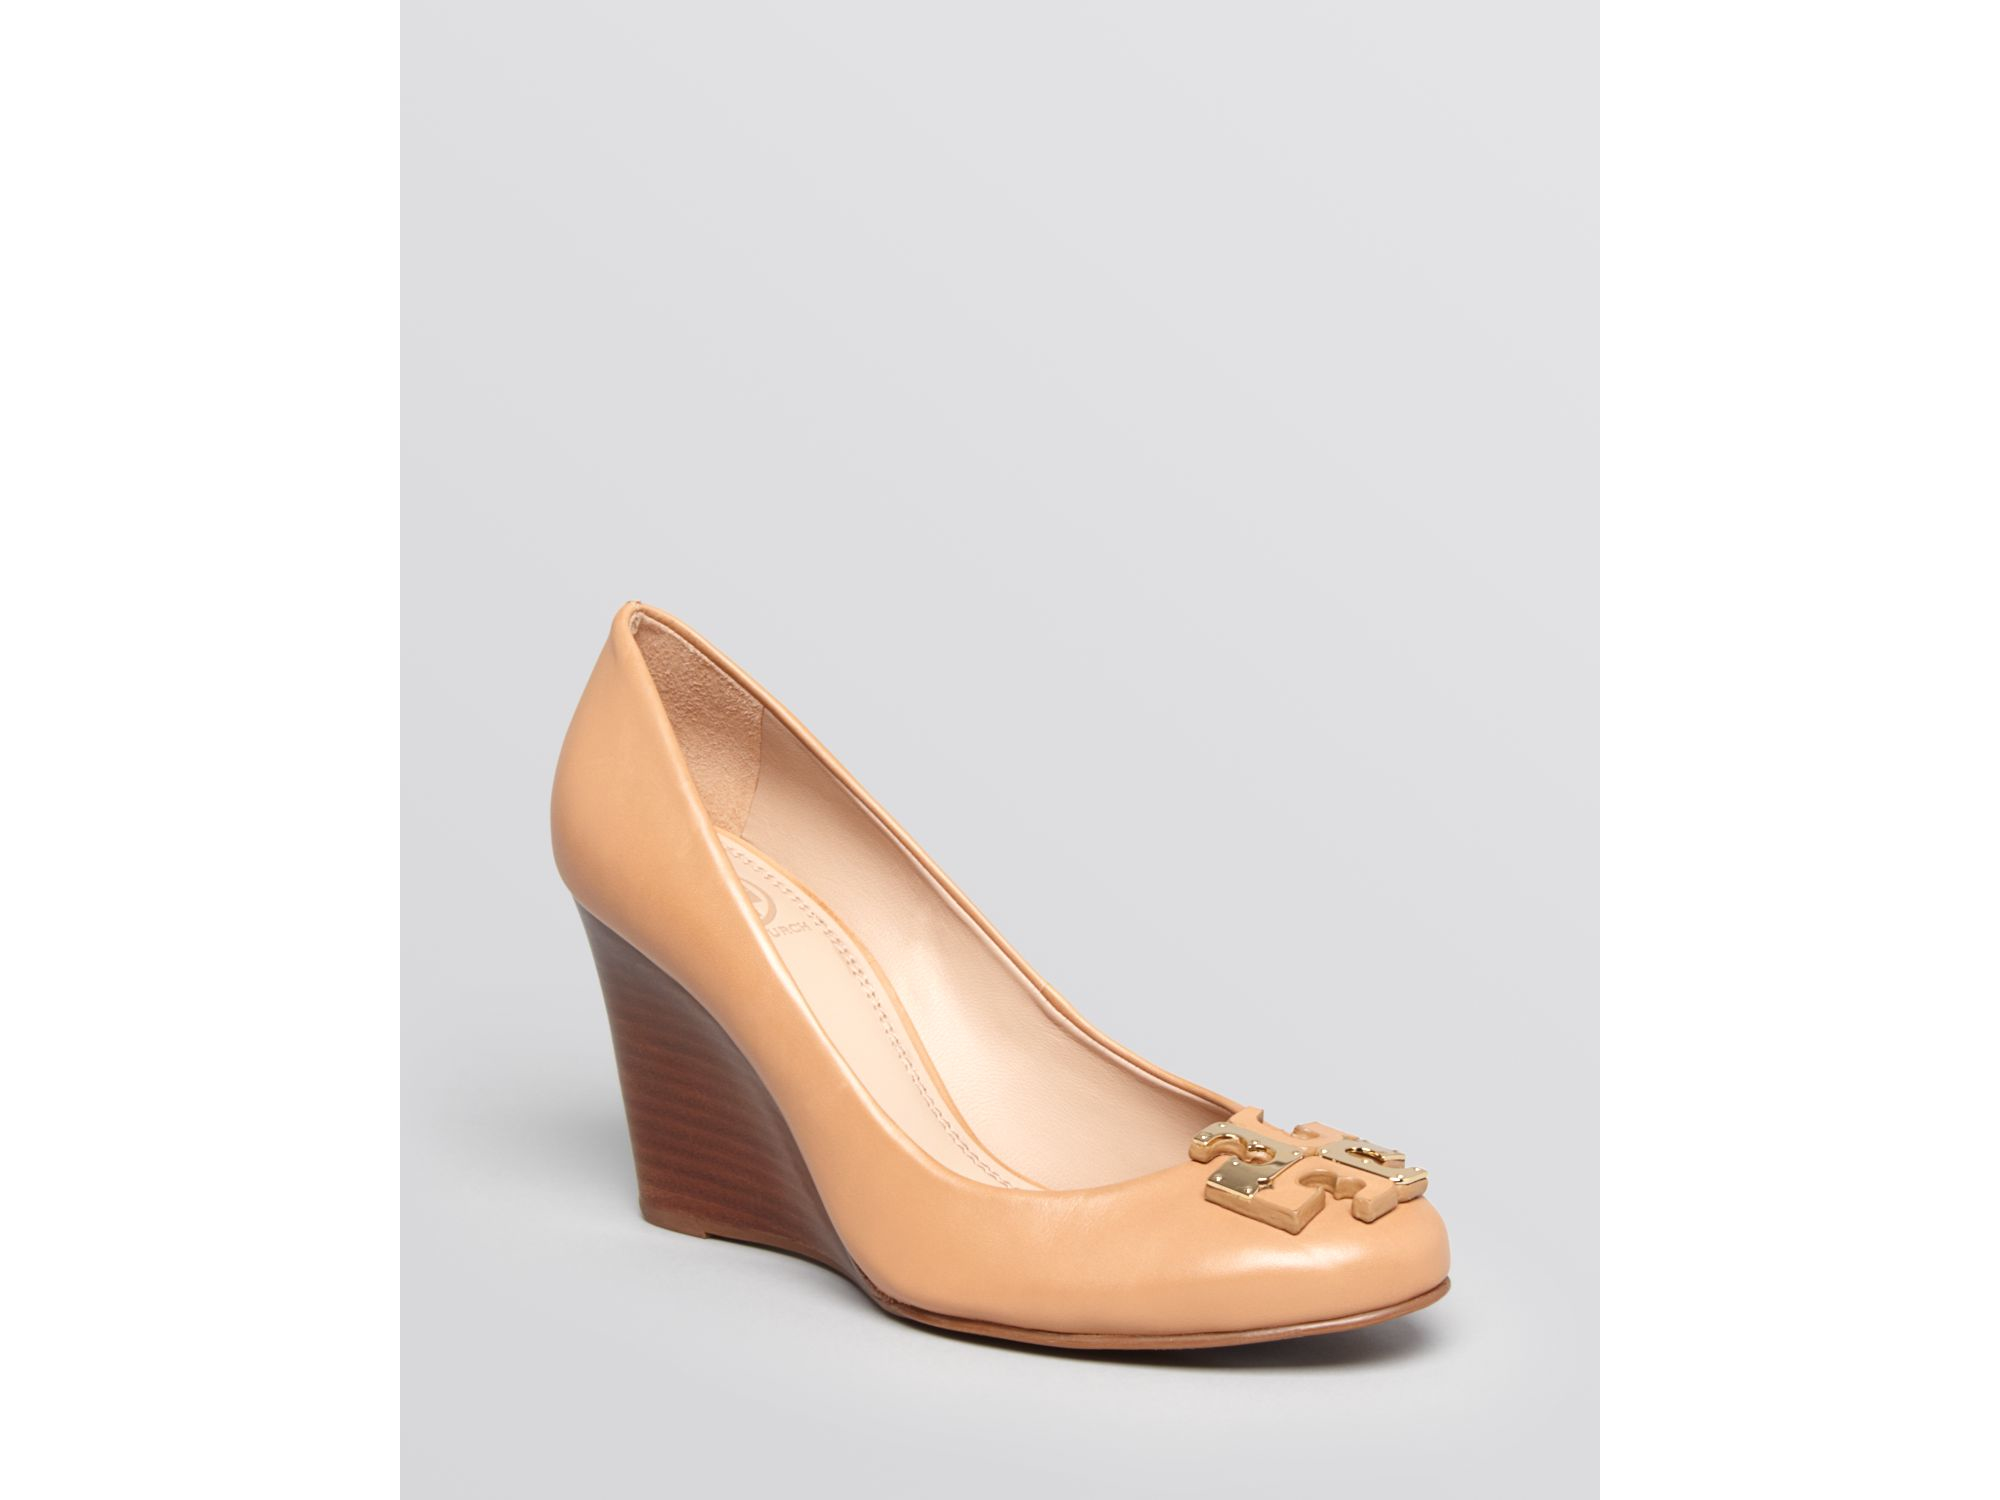 Tory Burch Wedge Pumps - Lowell in Natural | Lyst